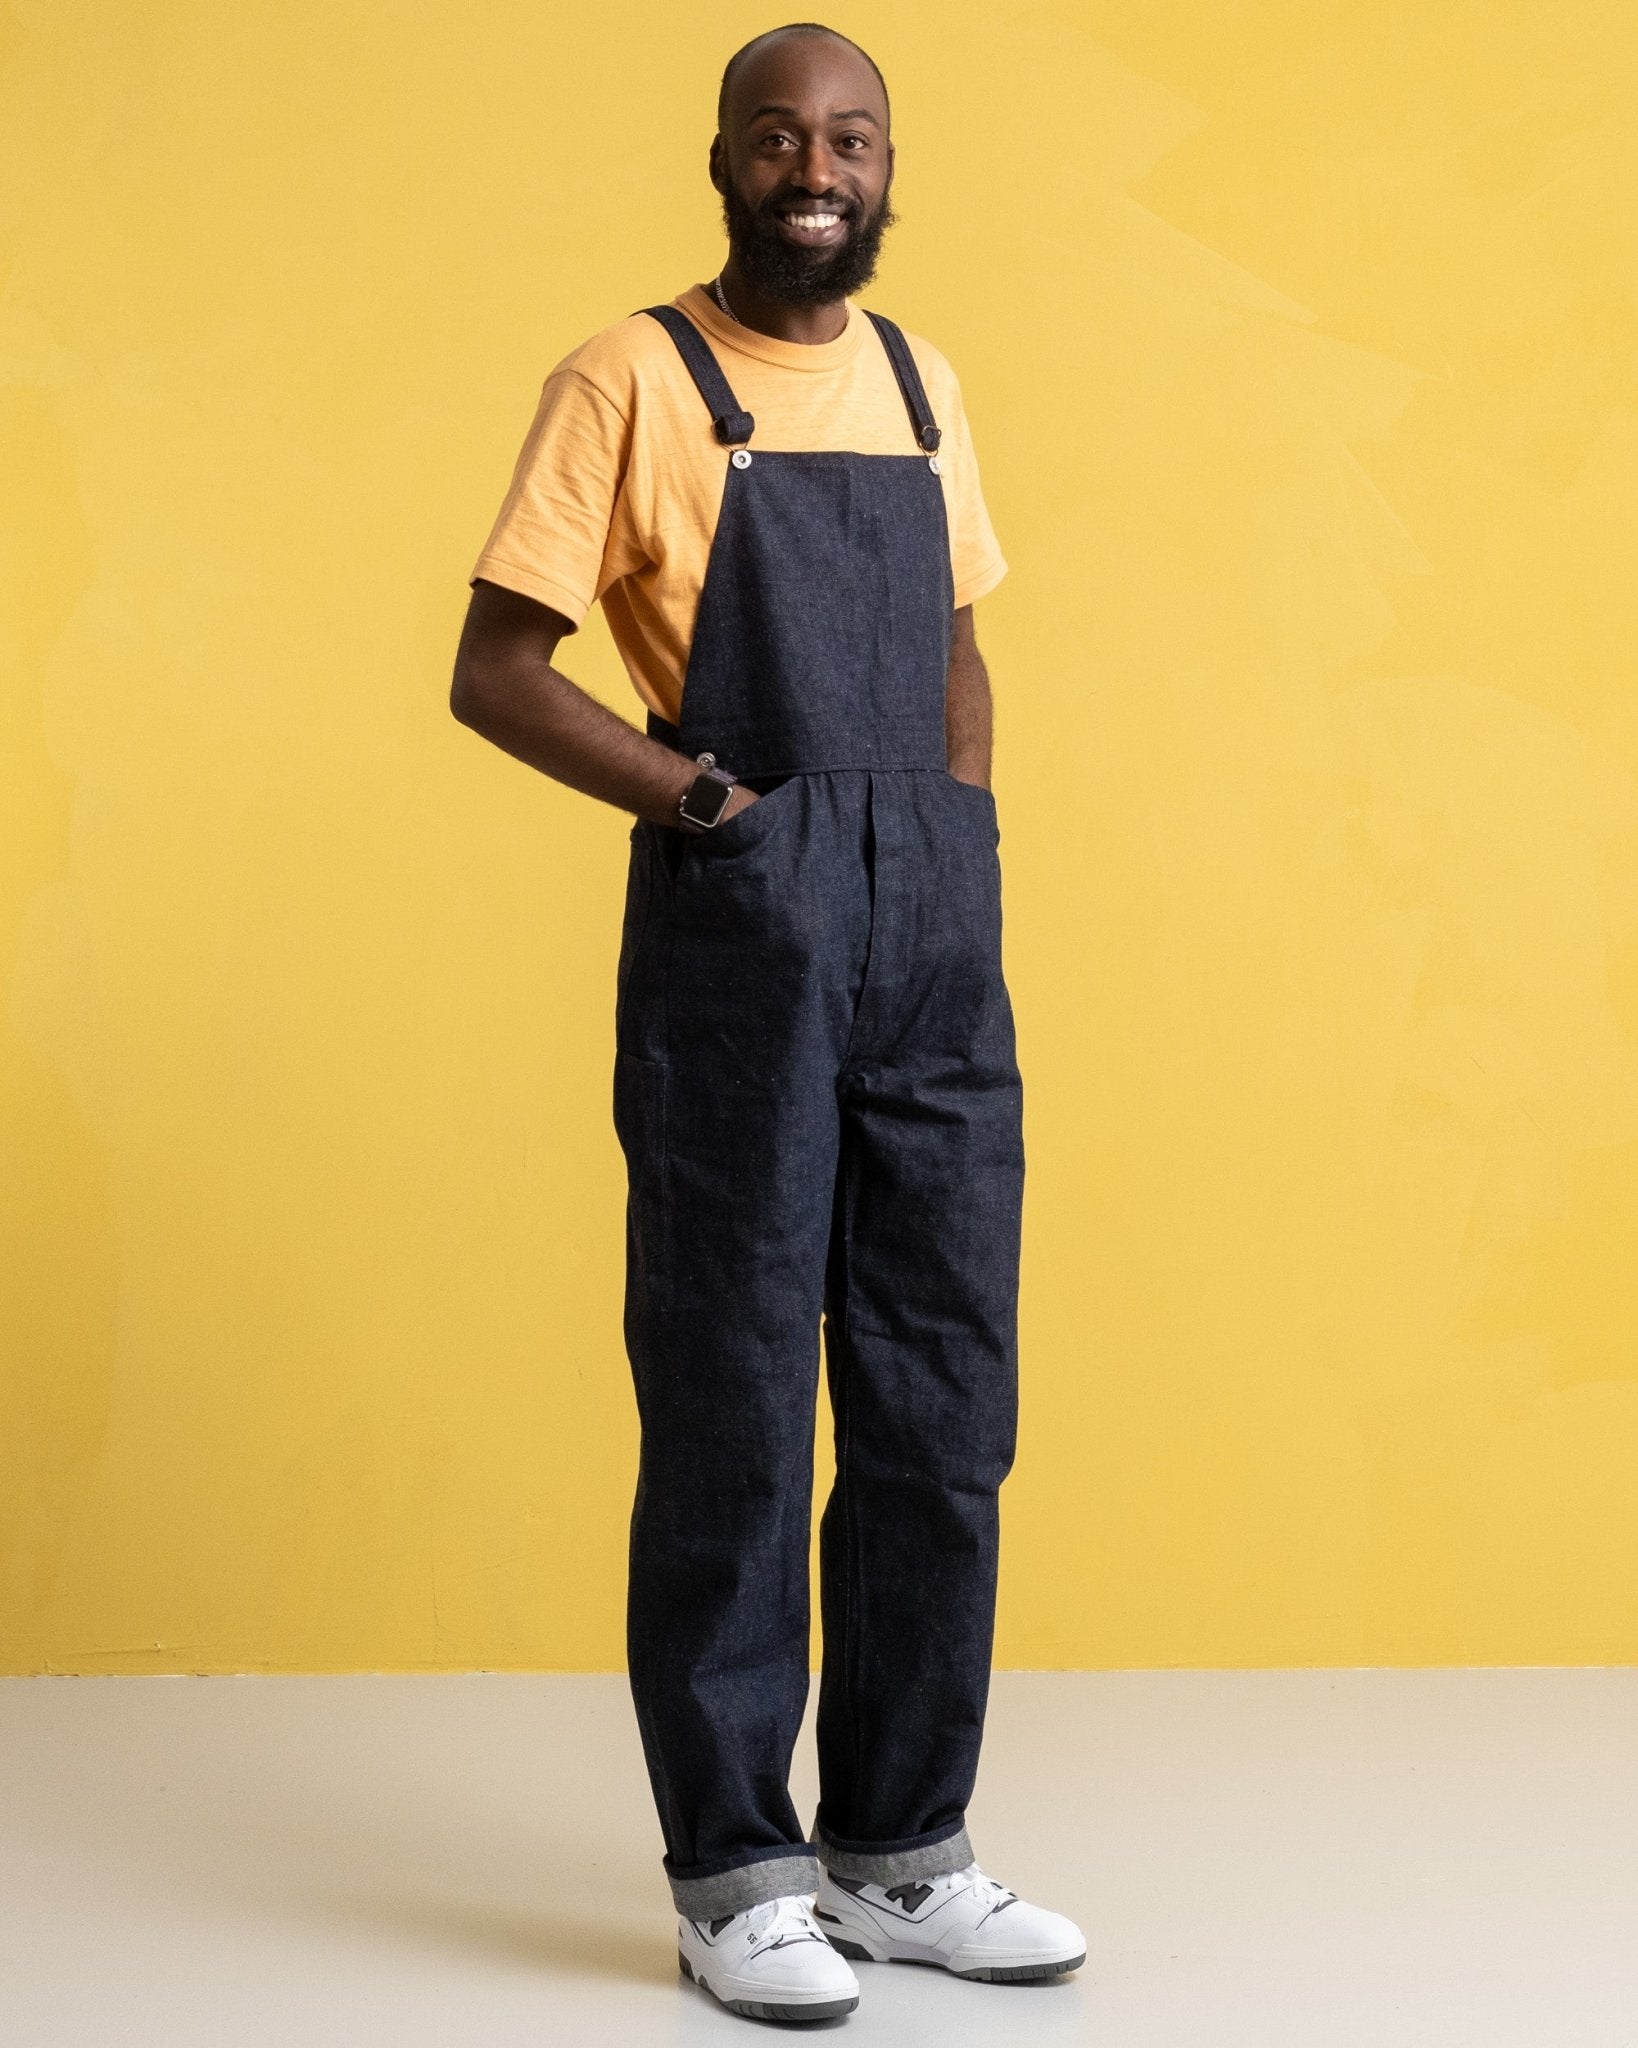 1220 Turn of Century Denim Overall 10 Oz One Wash - Meadow